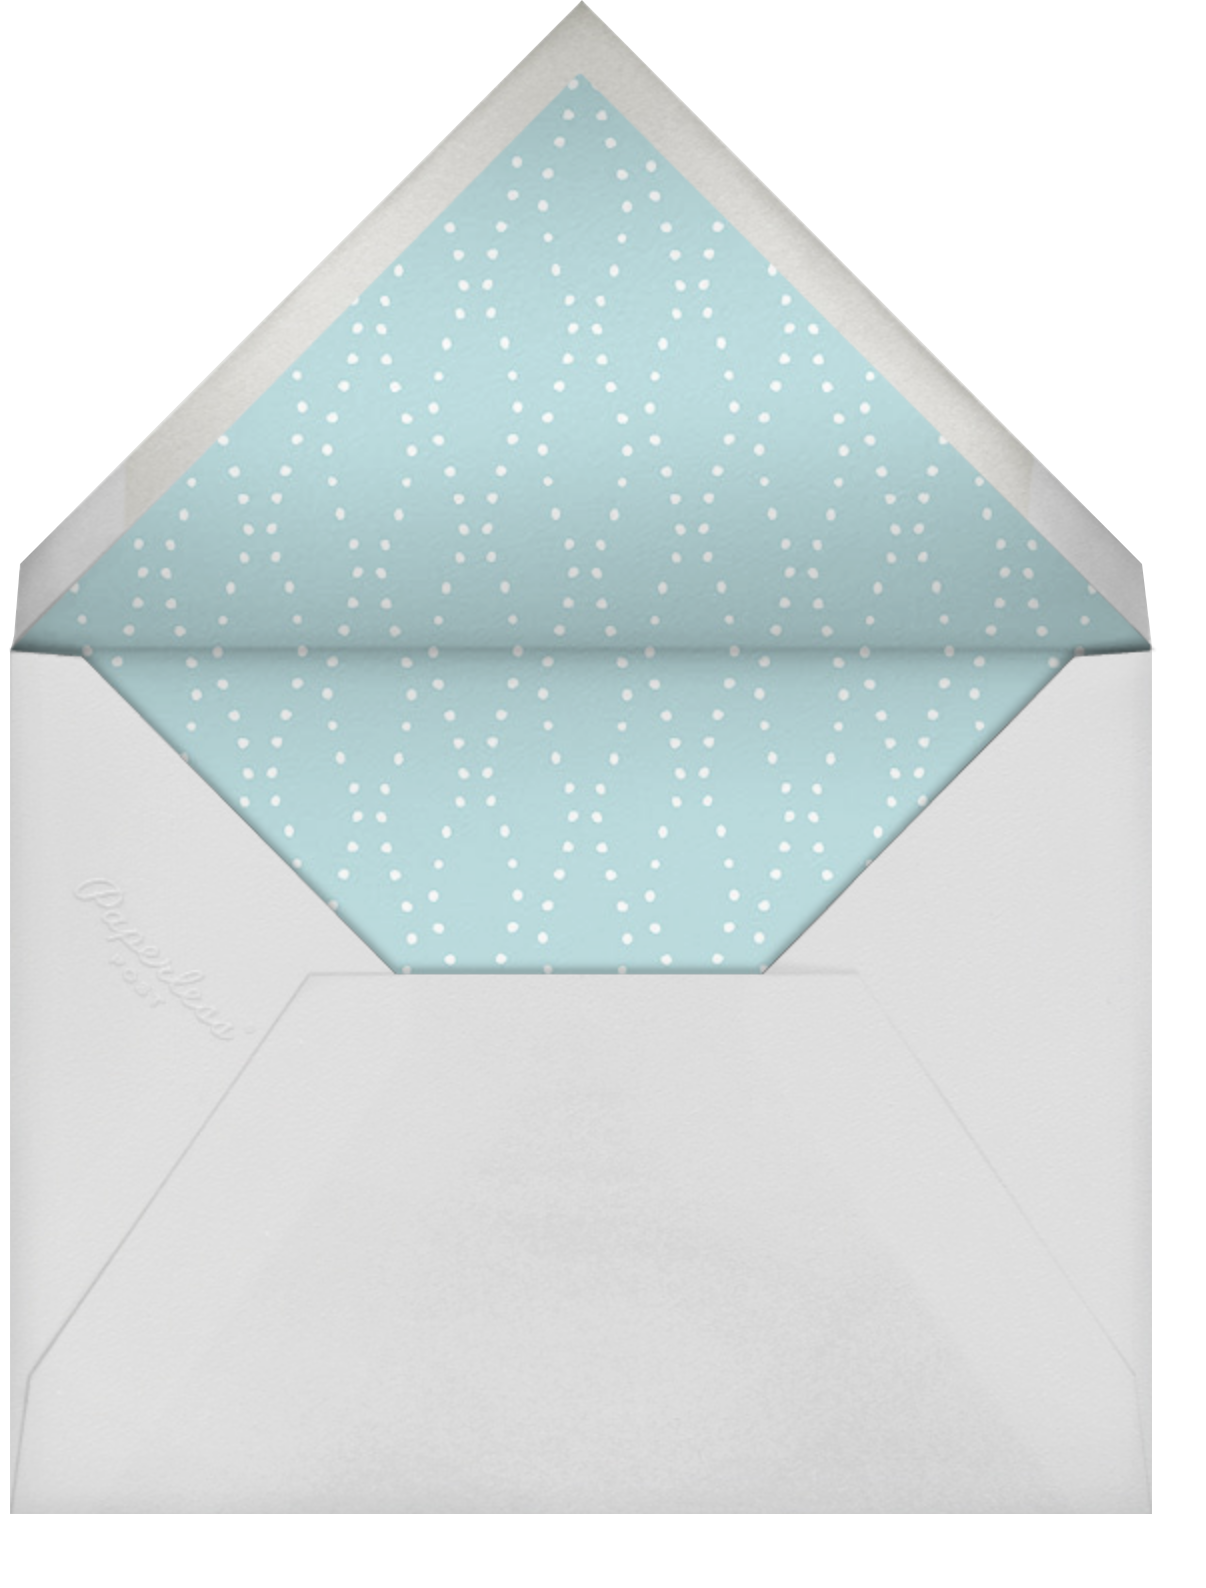 Lily of The Valley - Thinking of You (Light Blue) - Paperless Post - Envelope